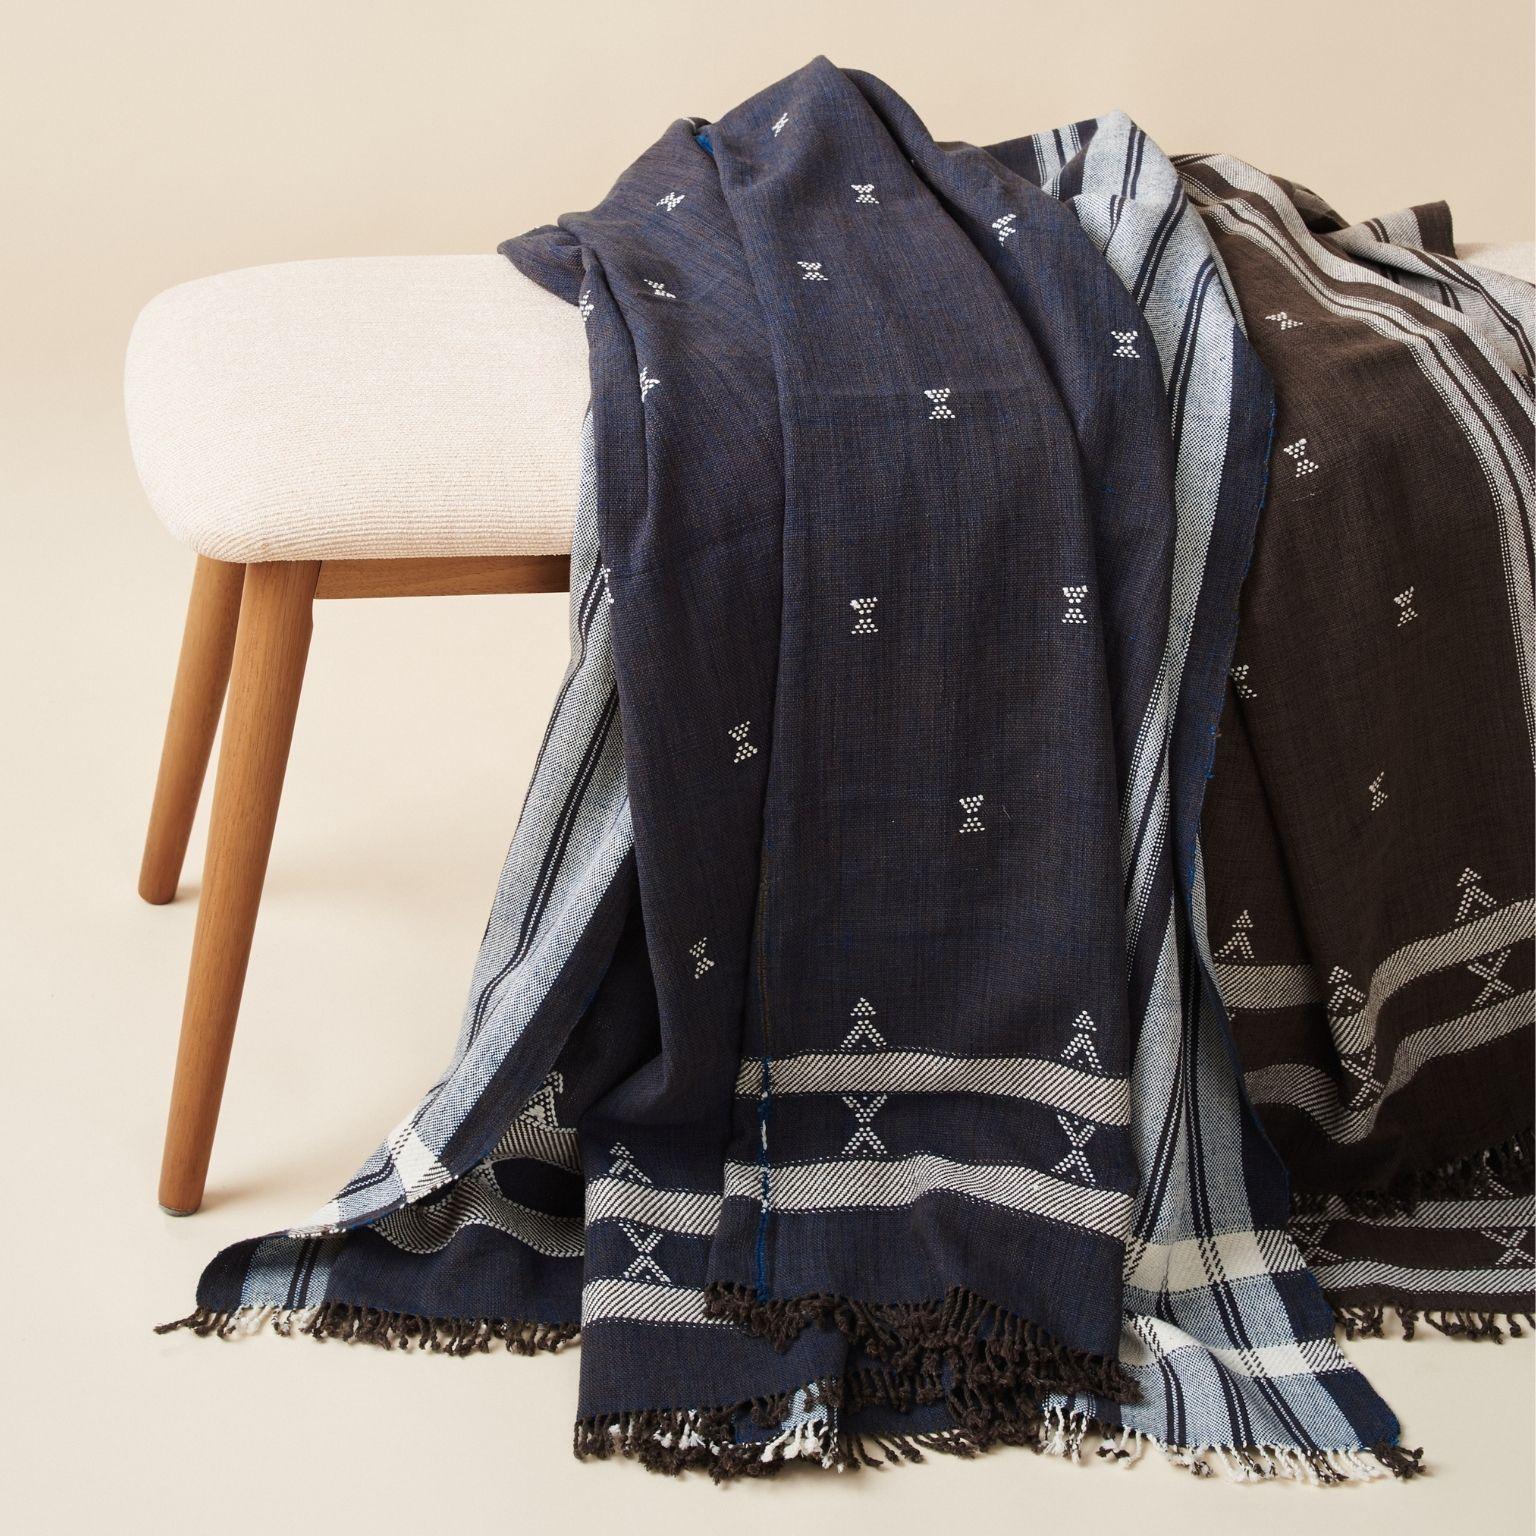 Custom design by Studio Variously, Indie Throw (  or bedspread or blanket ) is handwoven by master weavers in India and dyed entirely with earth-friendly dyes developed locally to artisan cluster.

A sustainable design brand based out of Michigan,